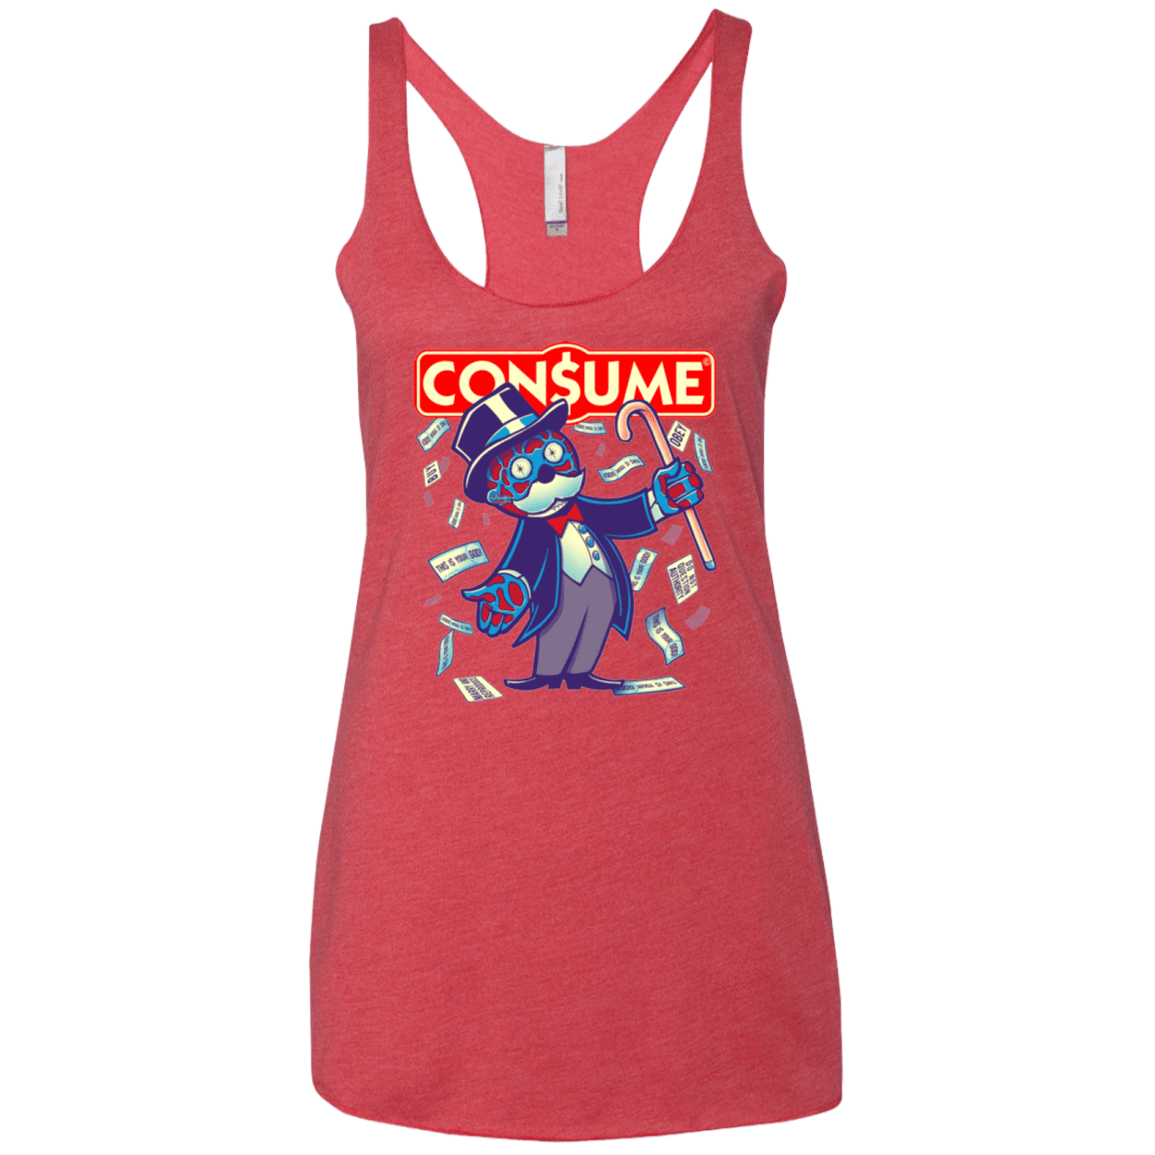 T-Shirts Vintage Red / X-Small CONSUME 2 Women's Triblend Racerback Tank